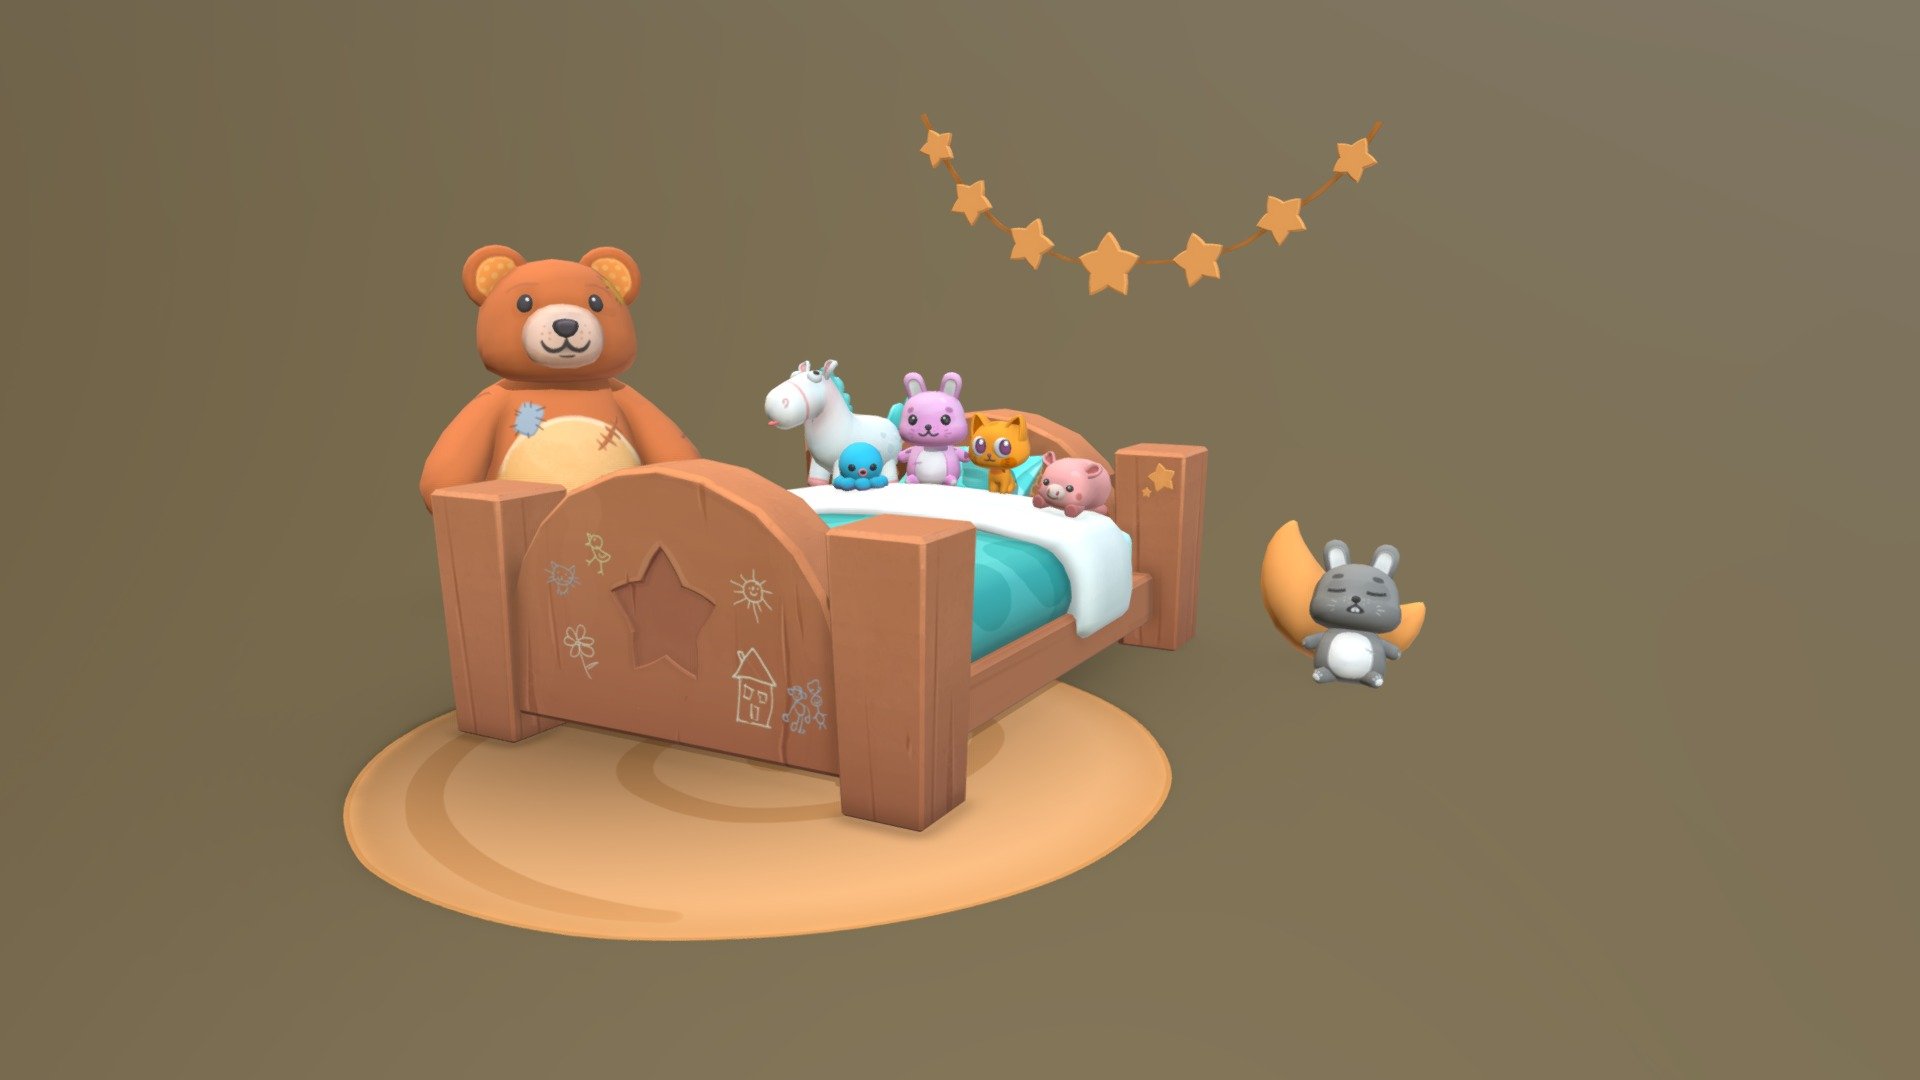 A 2 day project of a handpainted childs bedroom with plushies! It was a while since I've done handpainted texturing but I loved doing it 3d model